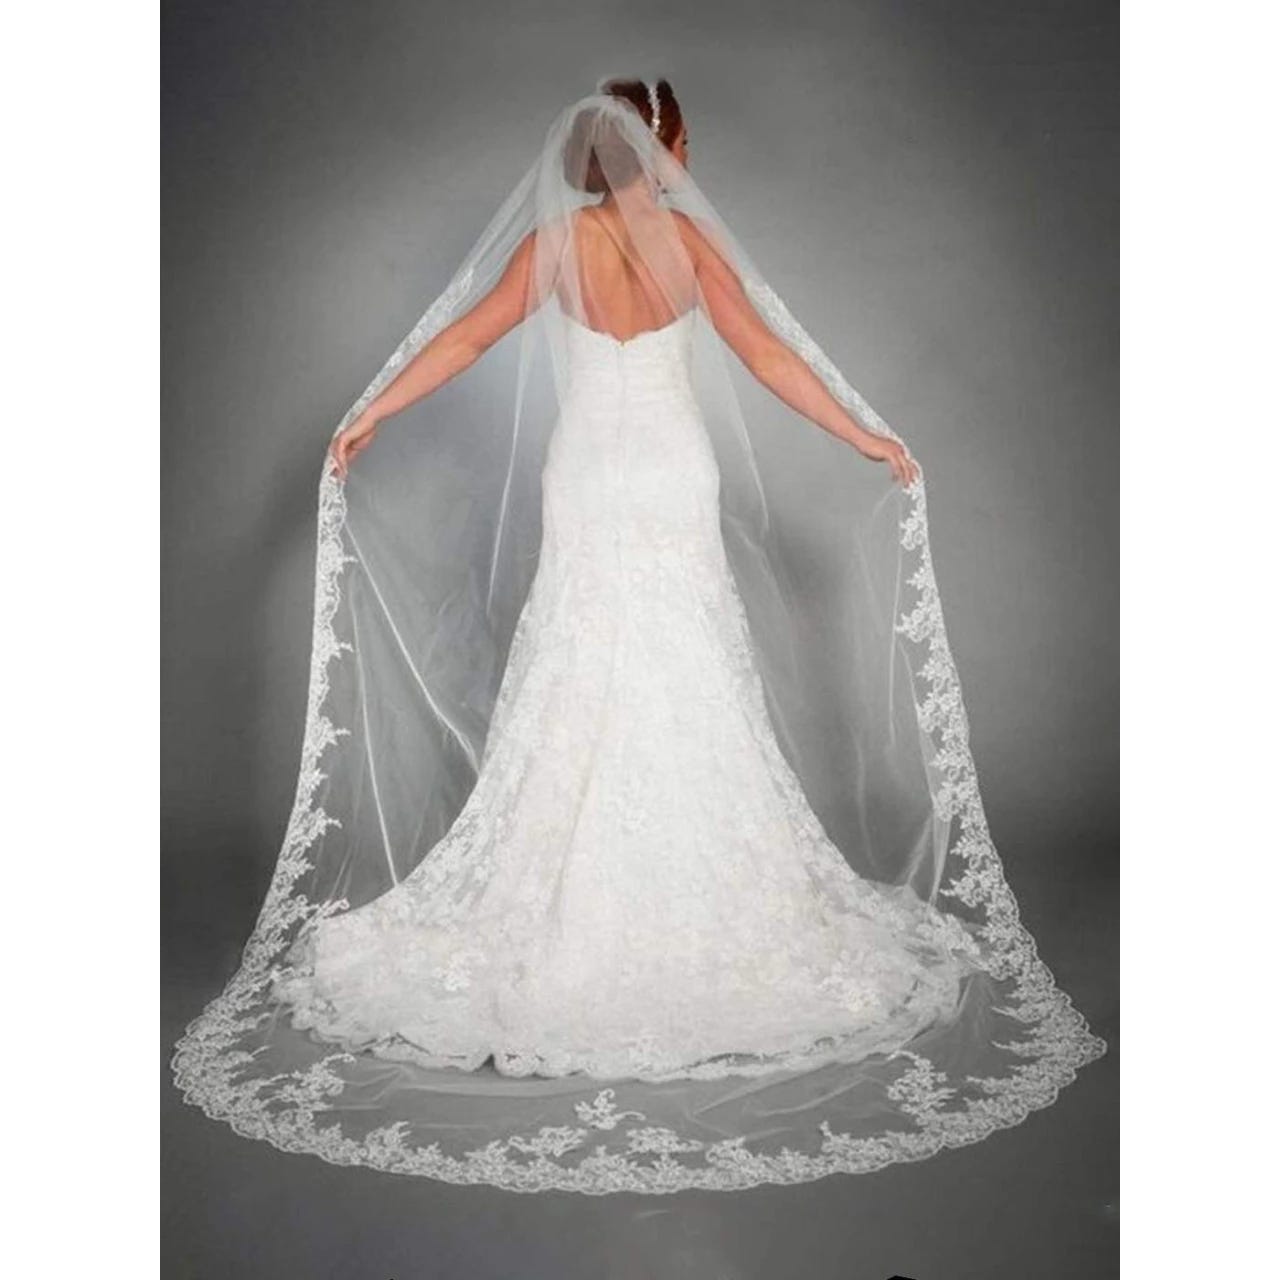  Unsutuo Wedding Veil Ivory Lace Applique Short Bride Veils  Shoulder Length Bridal Tulle Veil with Comb for Women and Girls : Clothing,  Shoes & Jewelry